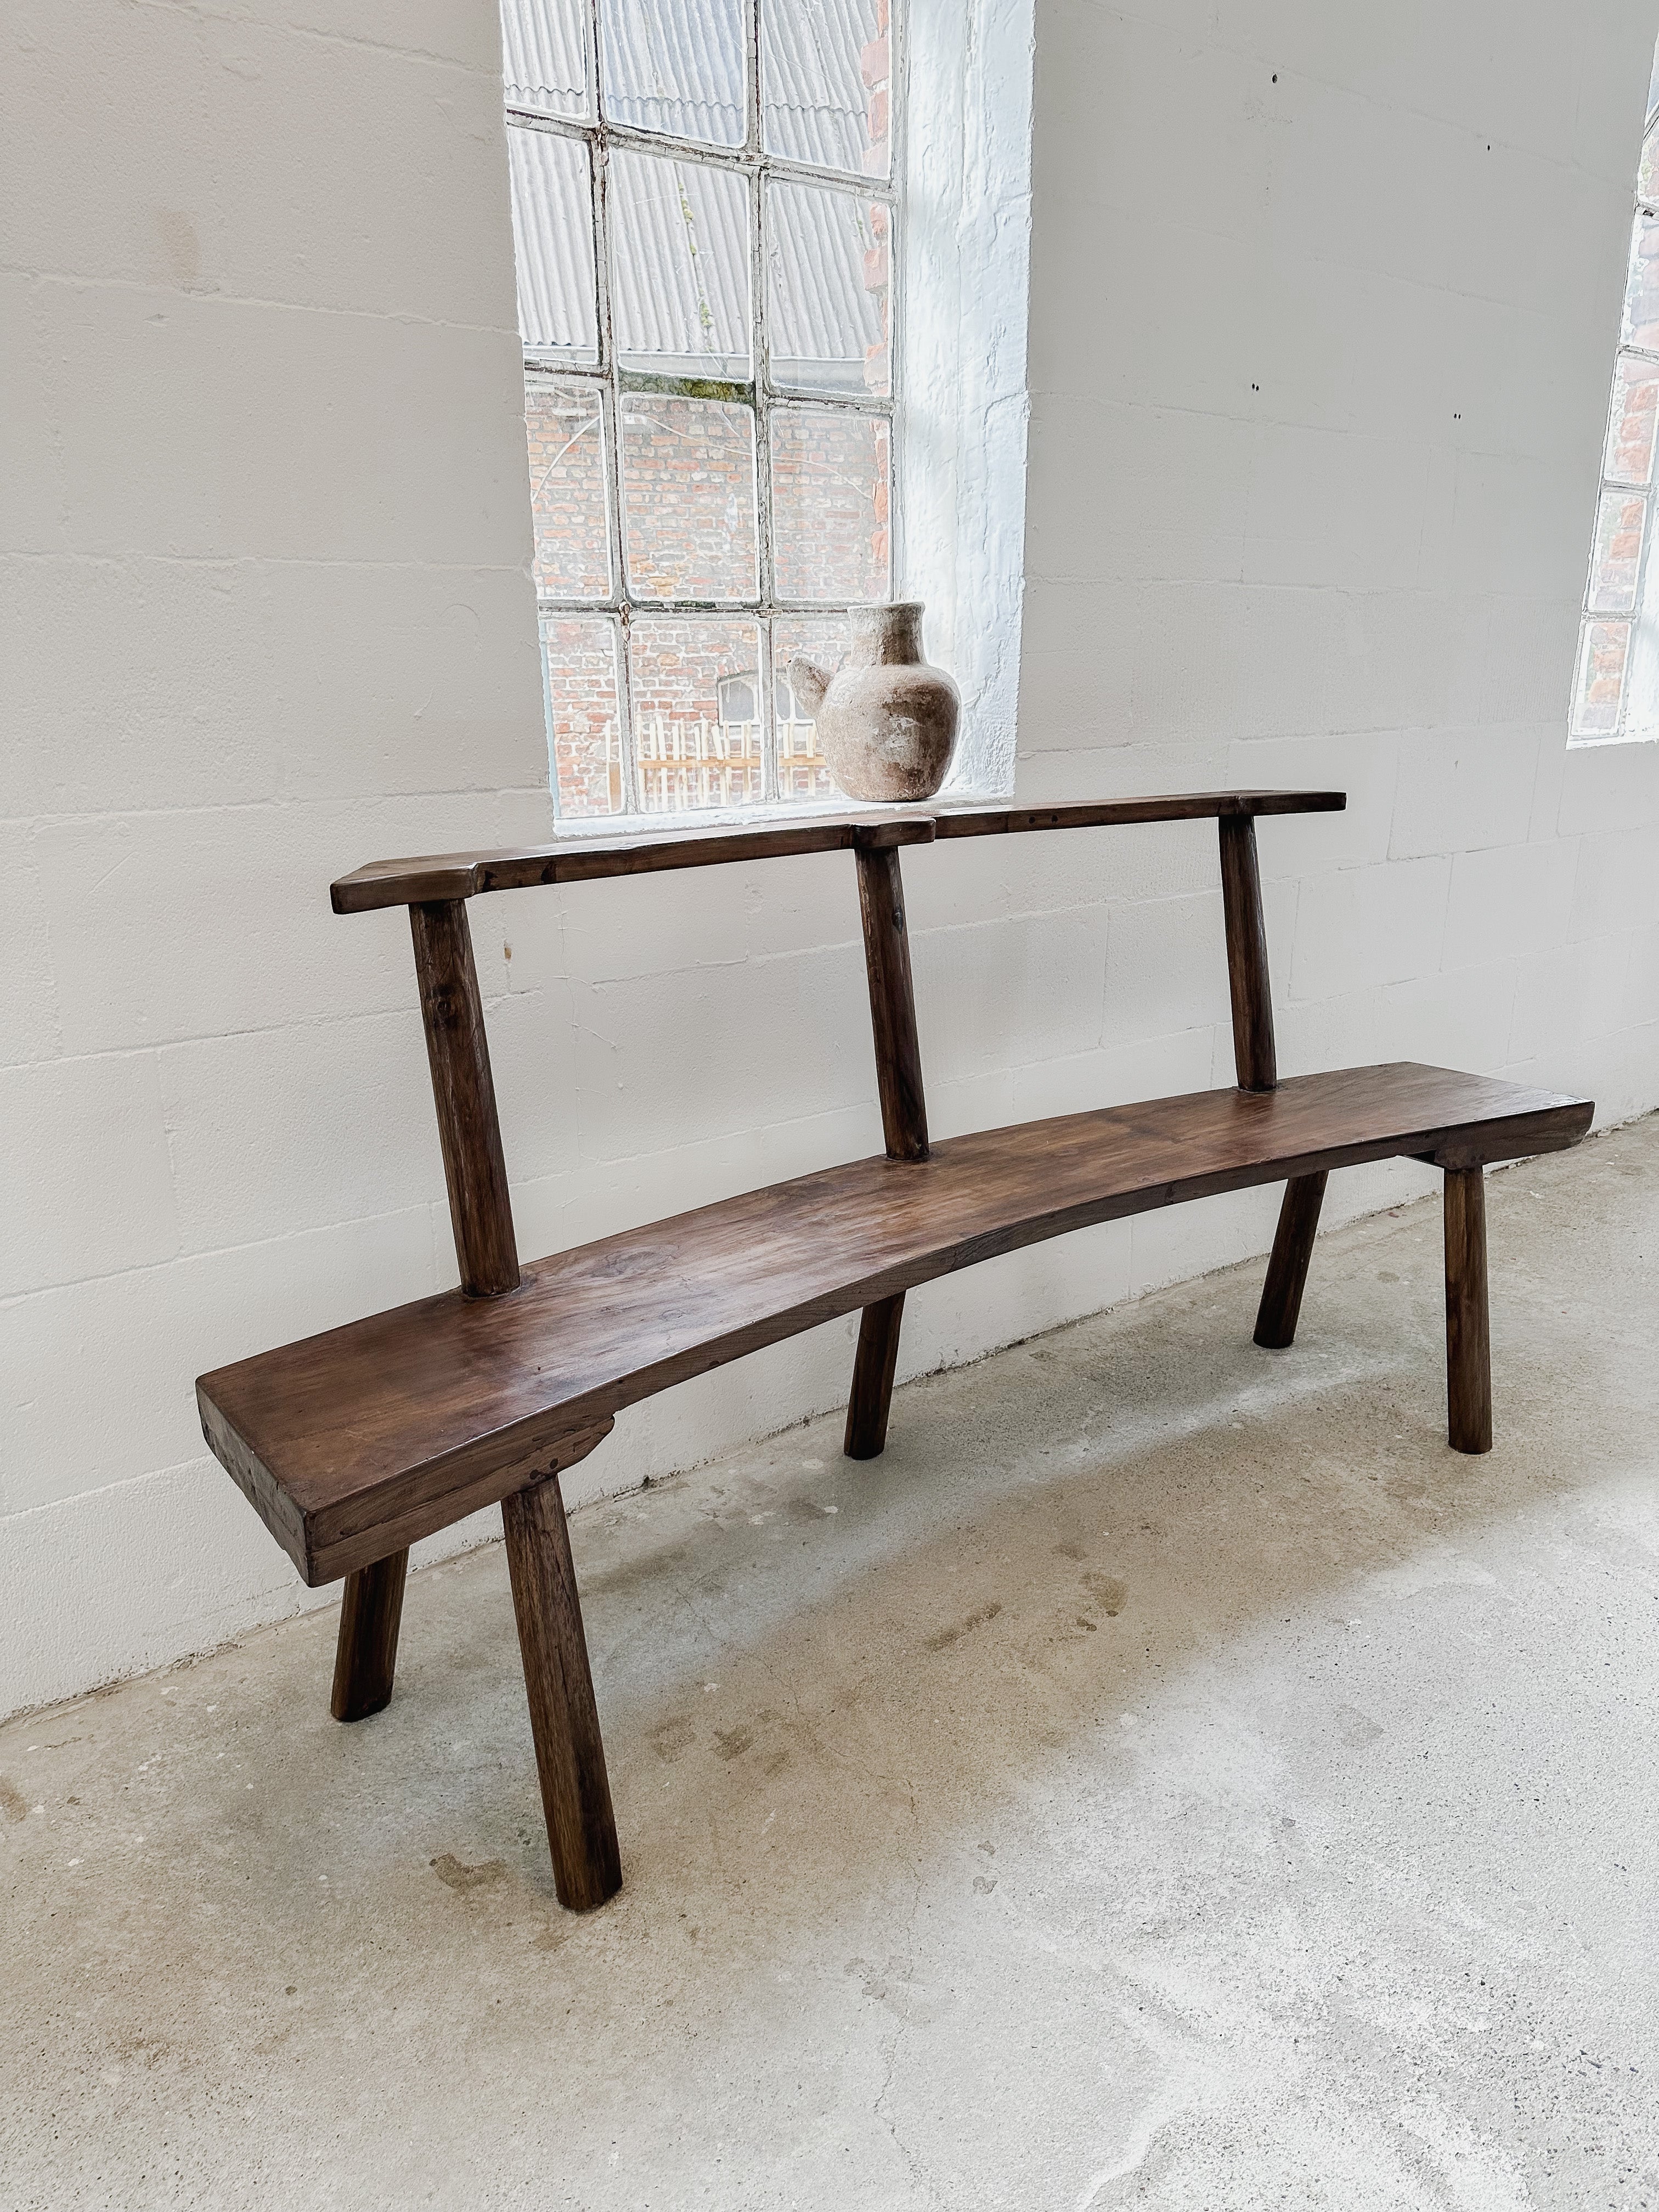 The curved teak bench